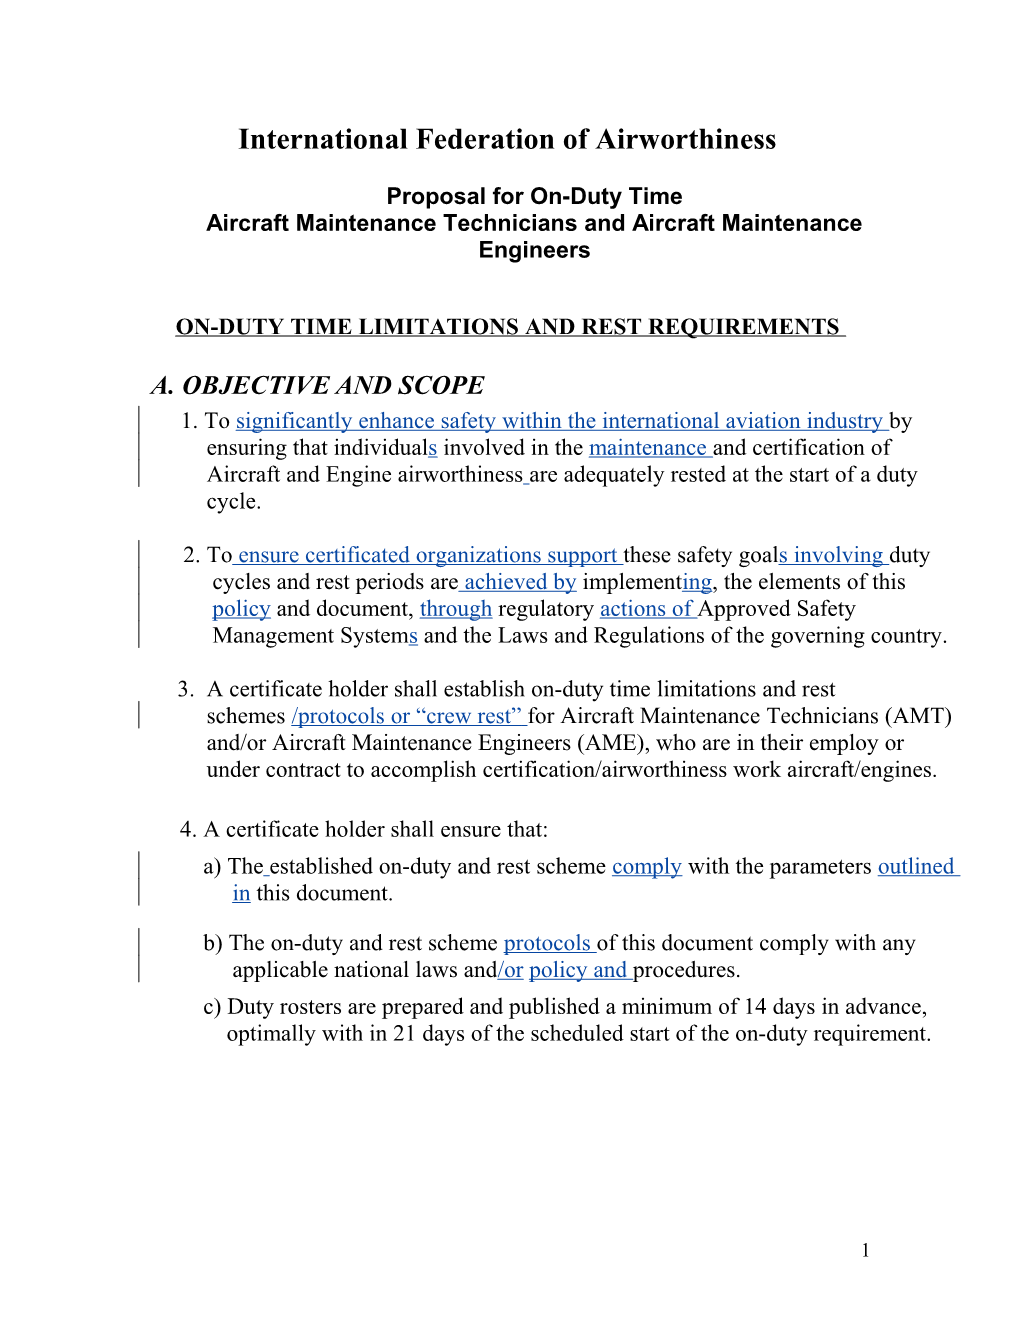 International Federation of Airworthiness Proposal for On-Duty Time Aircraft Maintenance